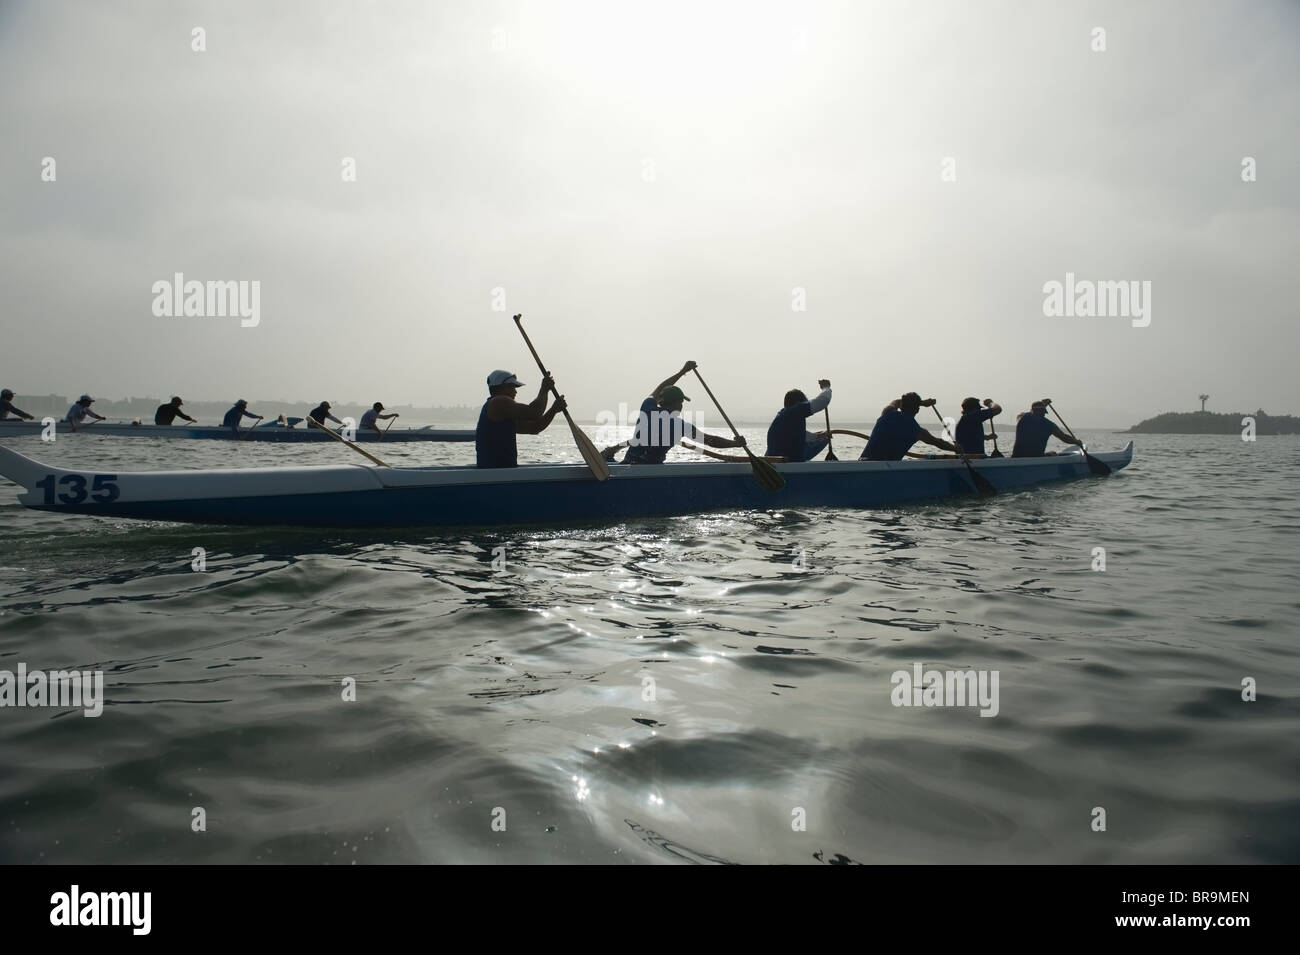 Canoa Outrigger team competere Foto Stock